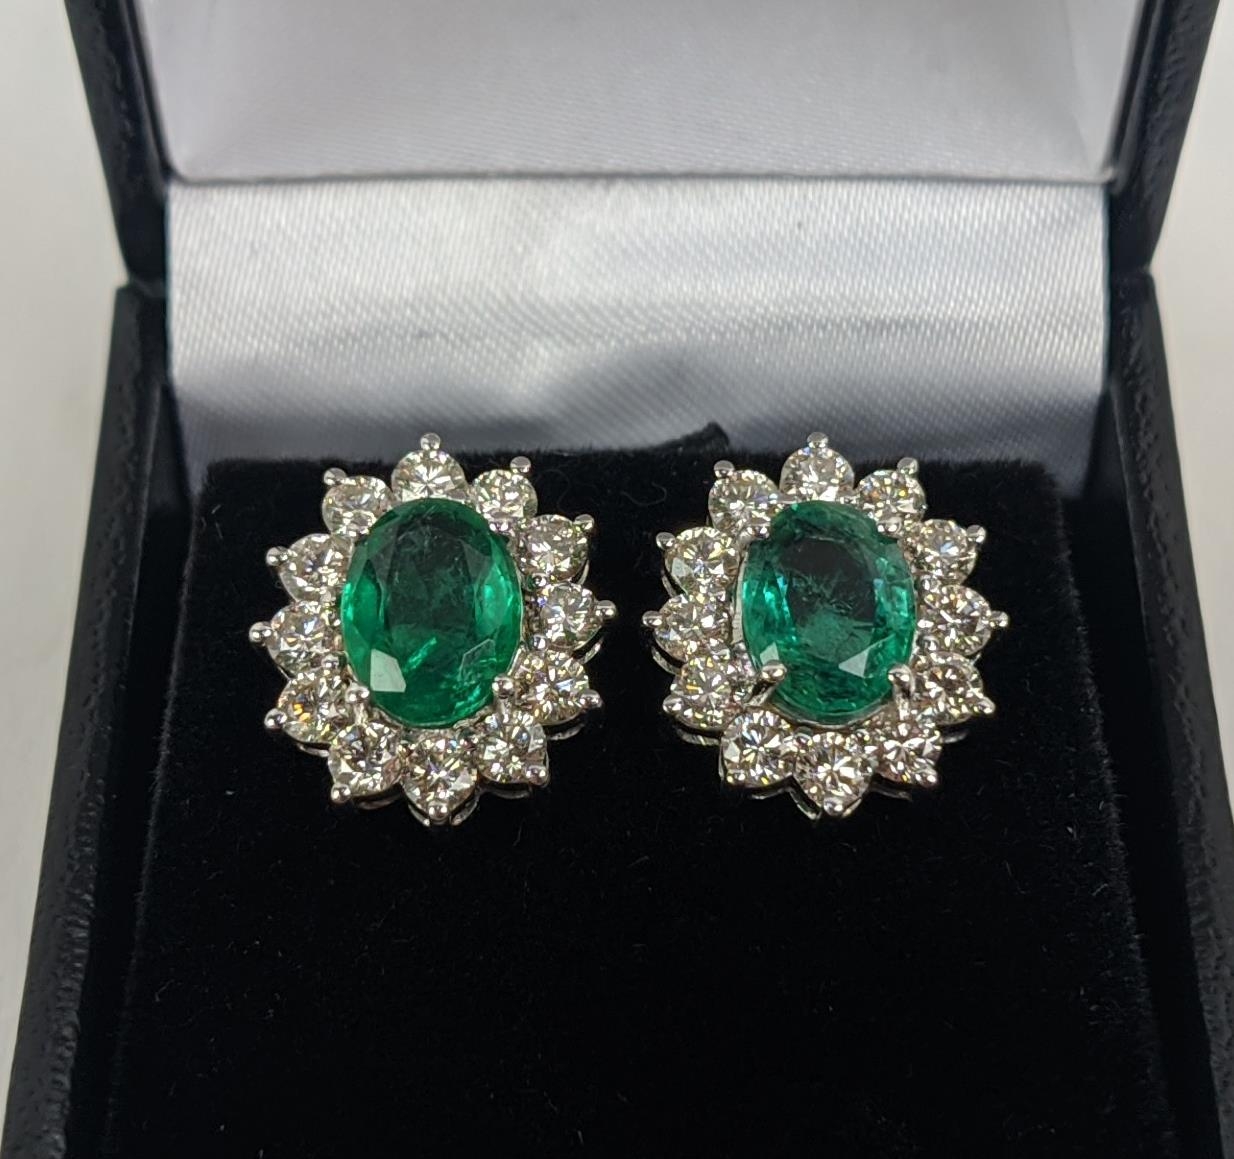 A PAIR OF 18CT WHITE GOLD EMERALD AND DIAMOND CLUSTER STUD EARRINGS, the oval mixed cut emerald